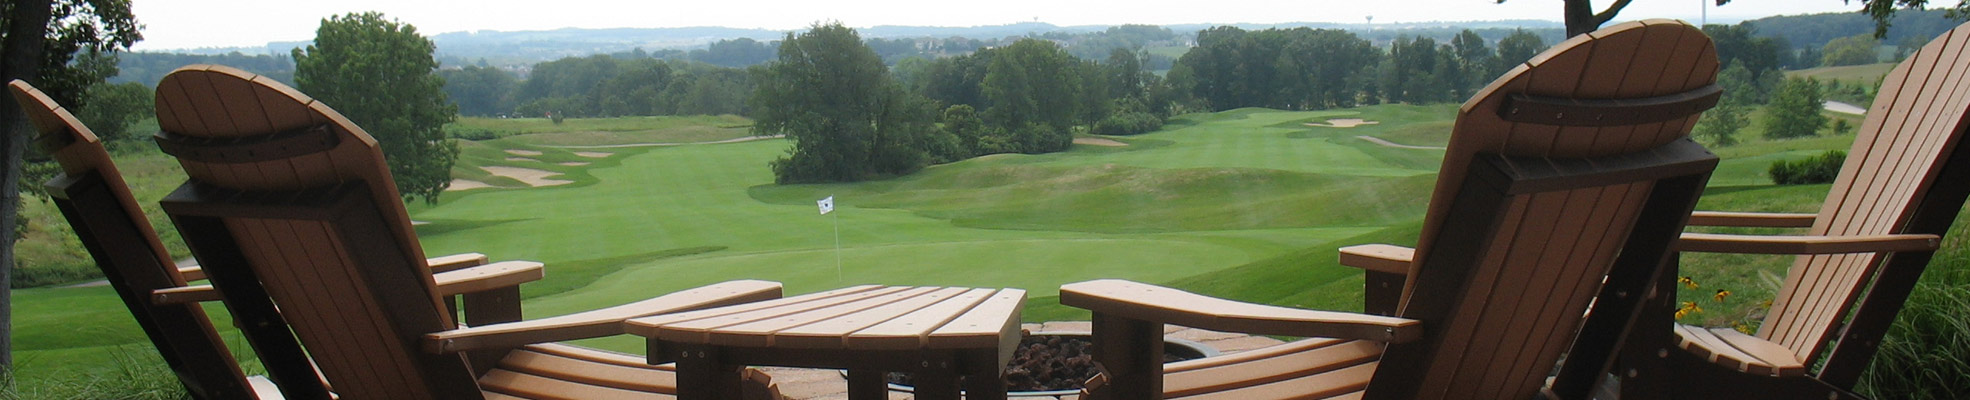 Outdoor Pavilion overlooking the course